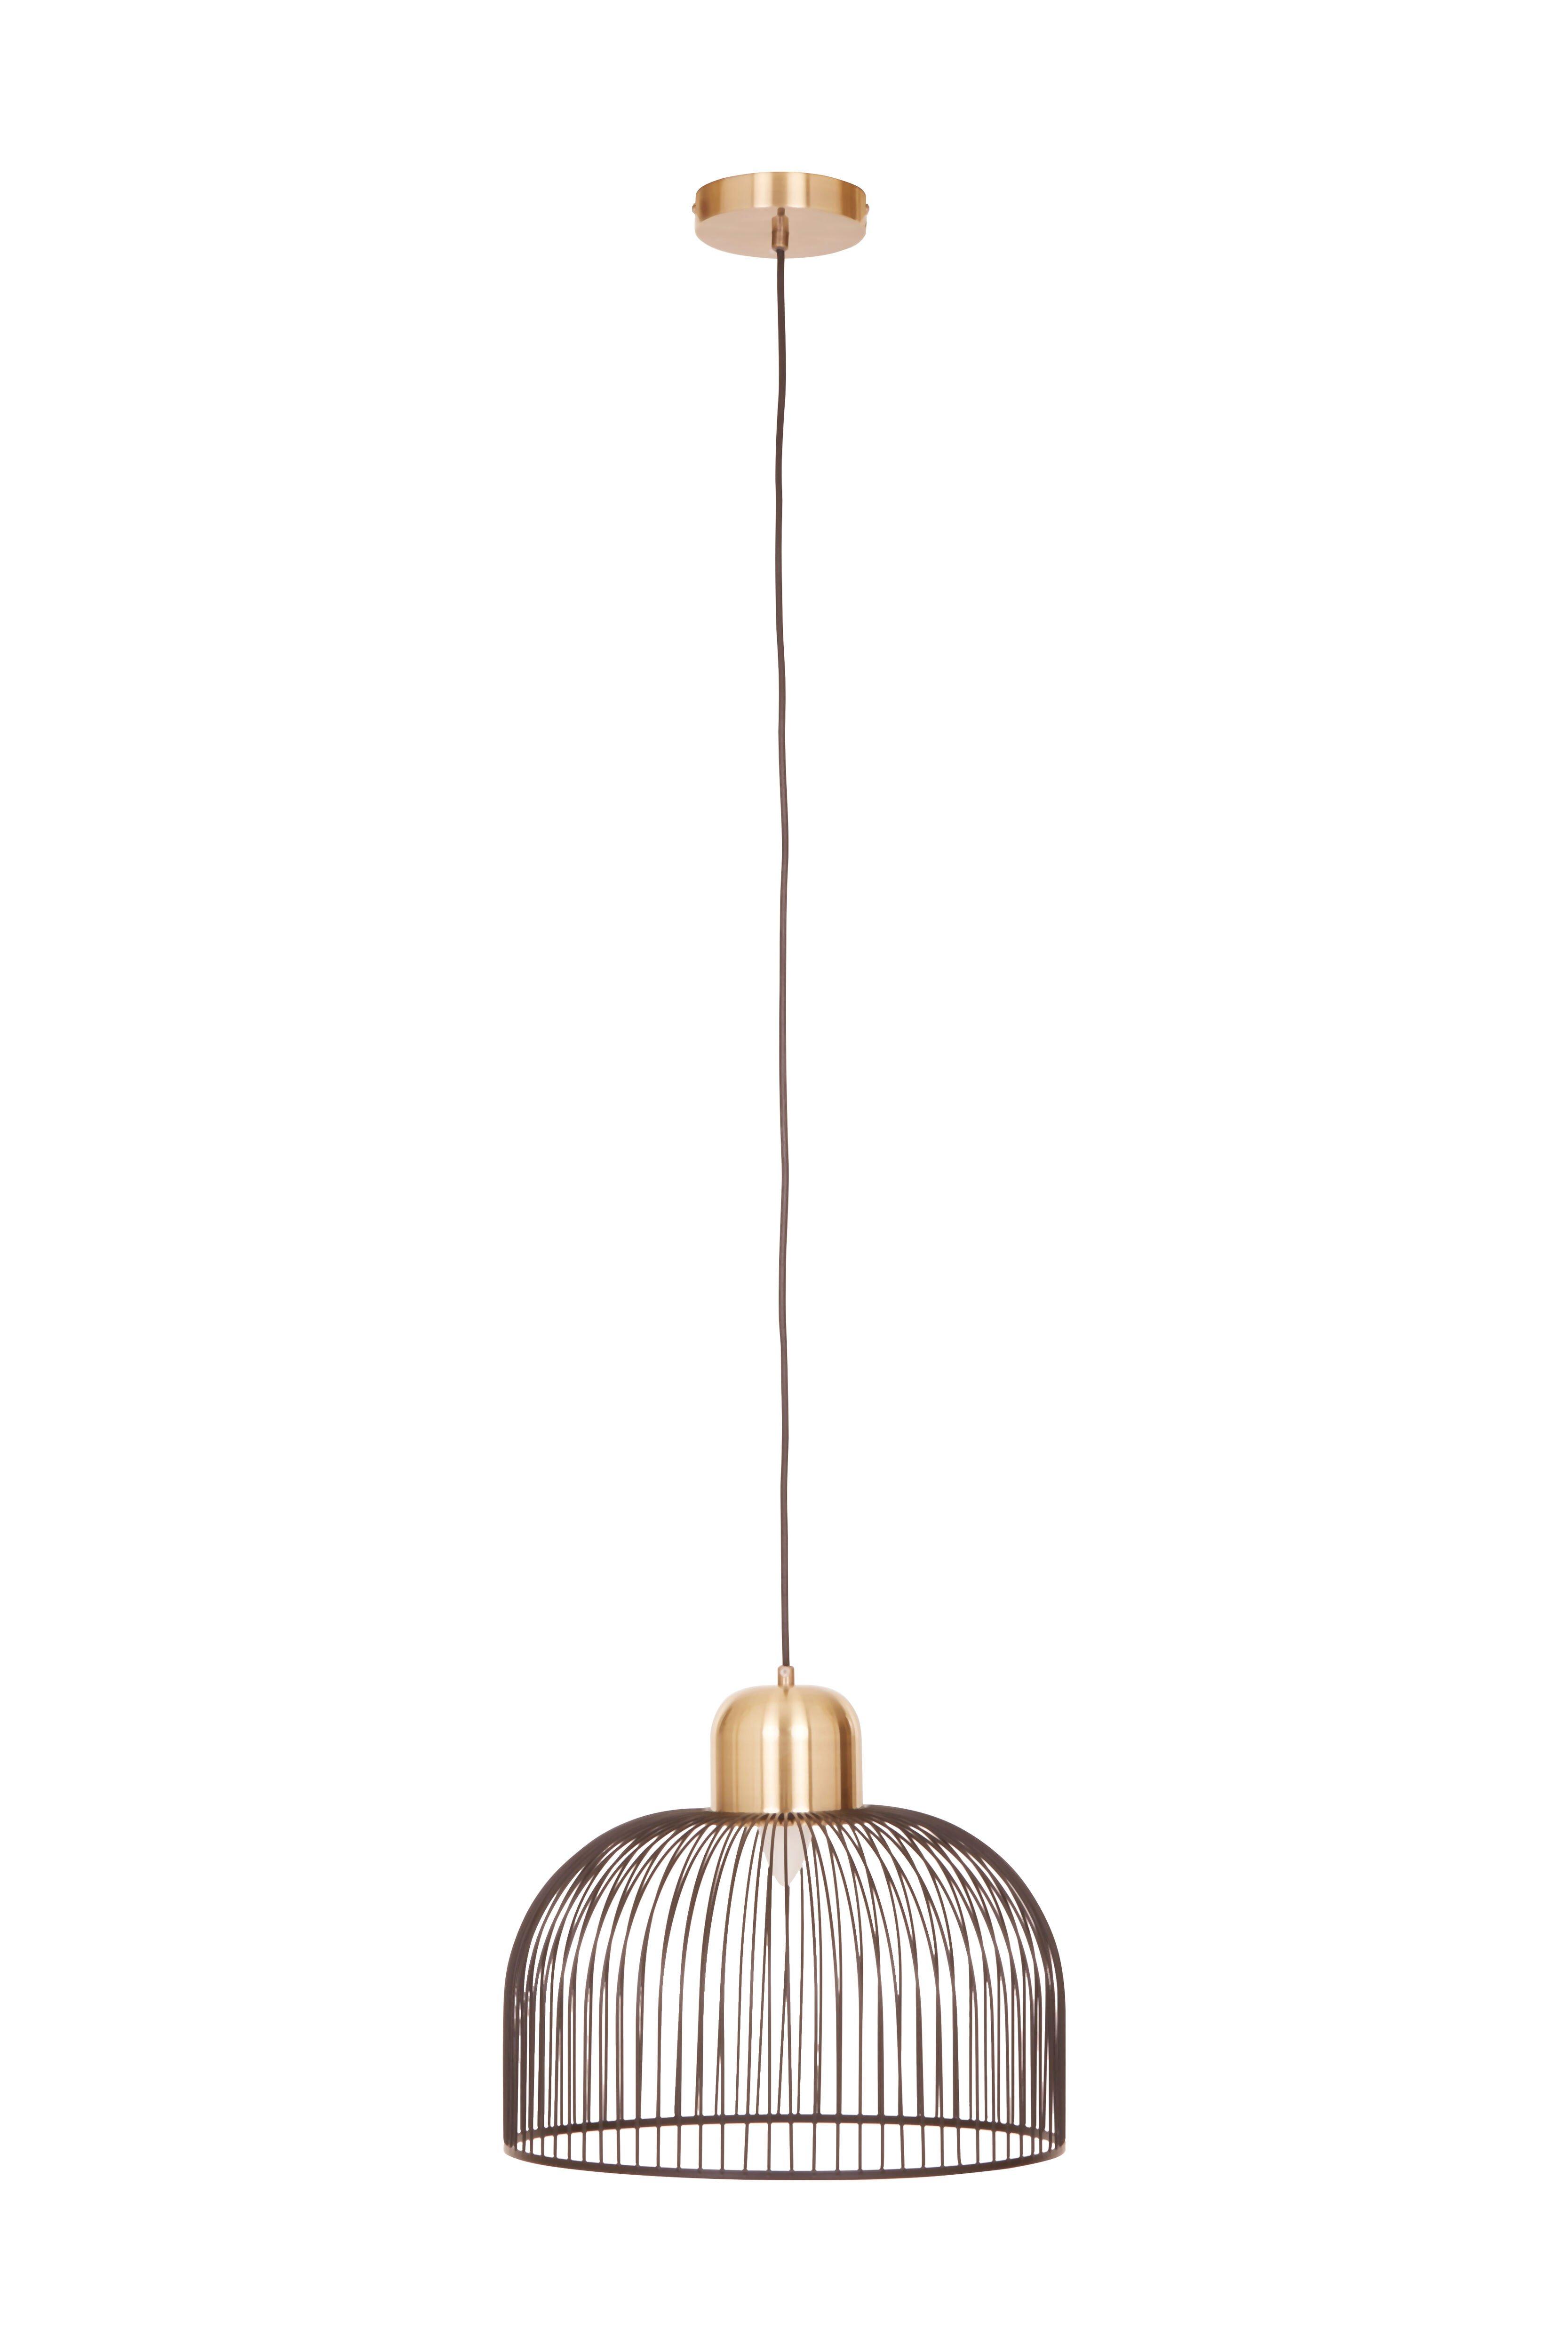 Interiors by Premier Lenno Black And Antique Brass Pendant Light